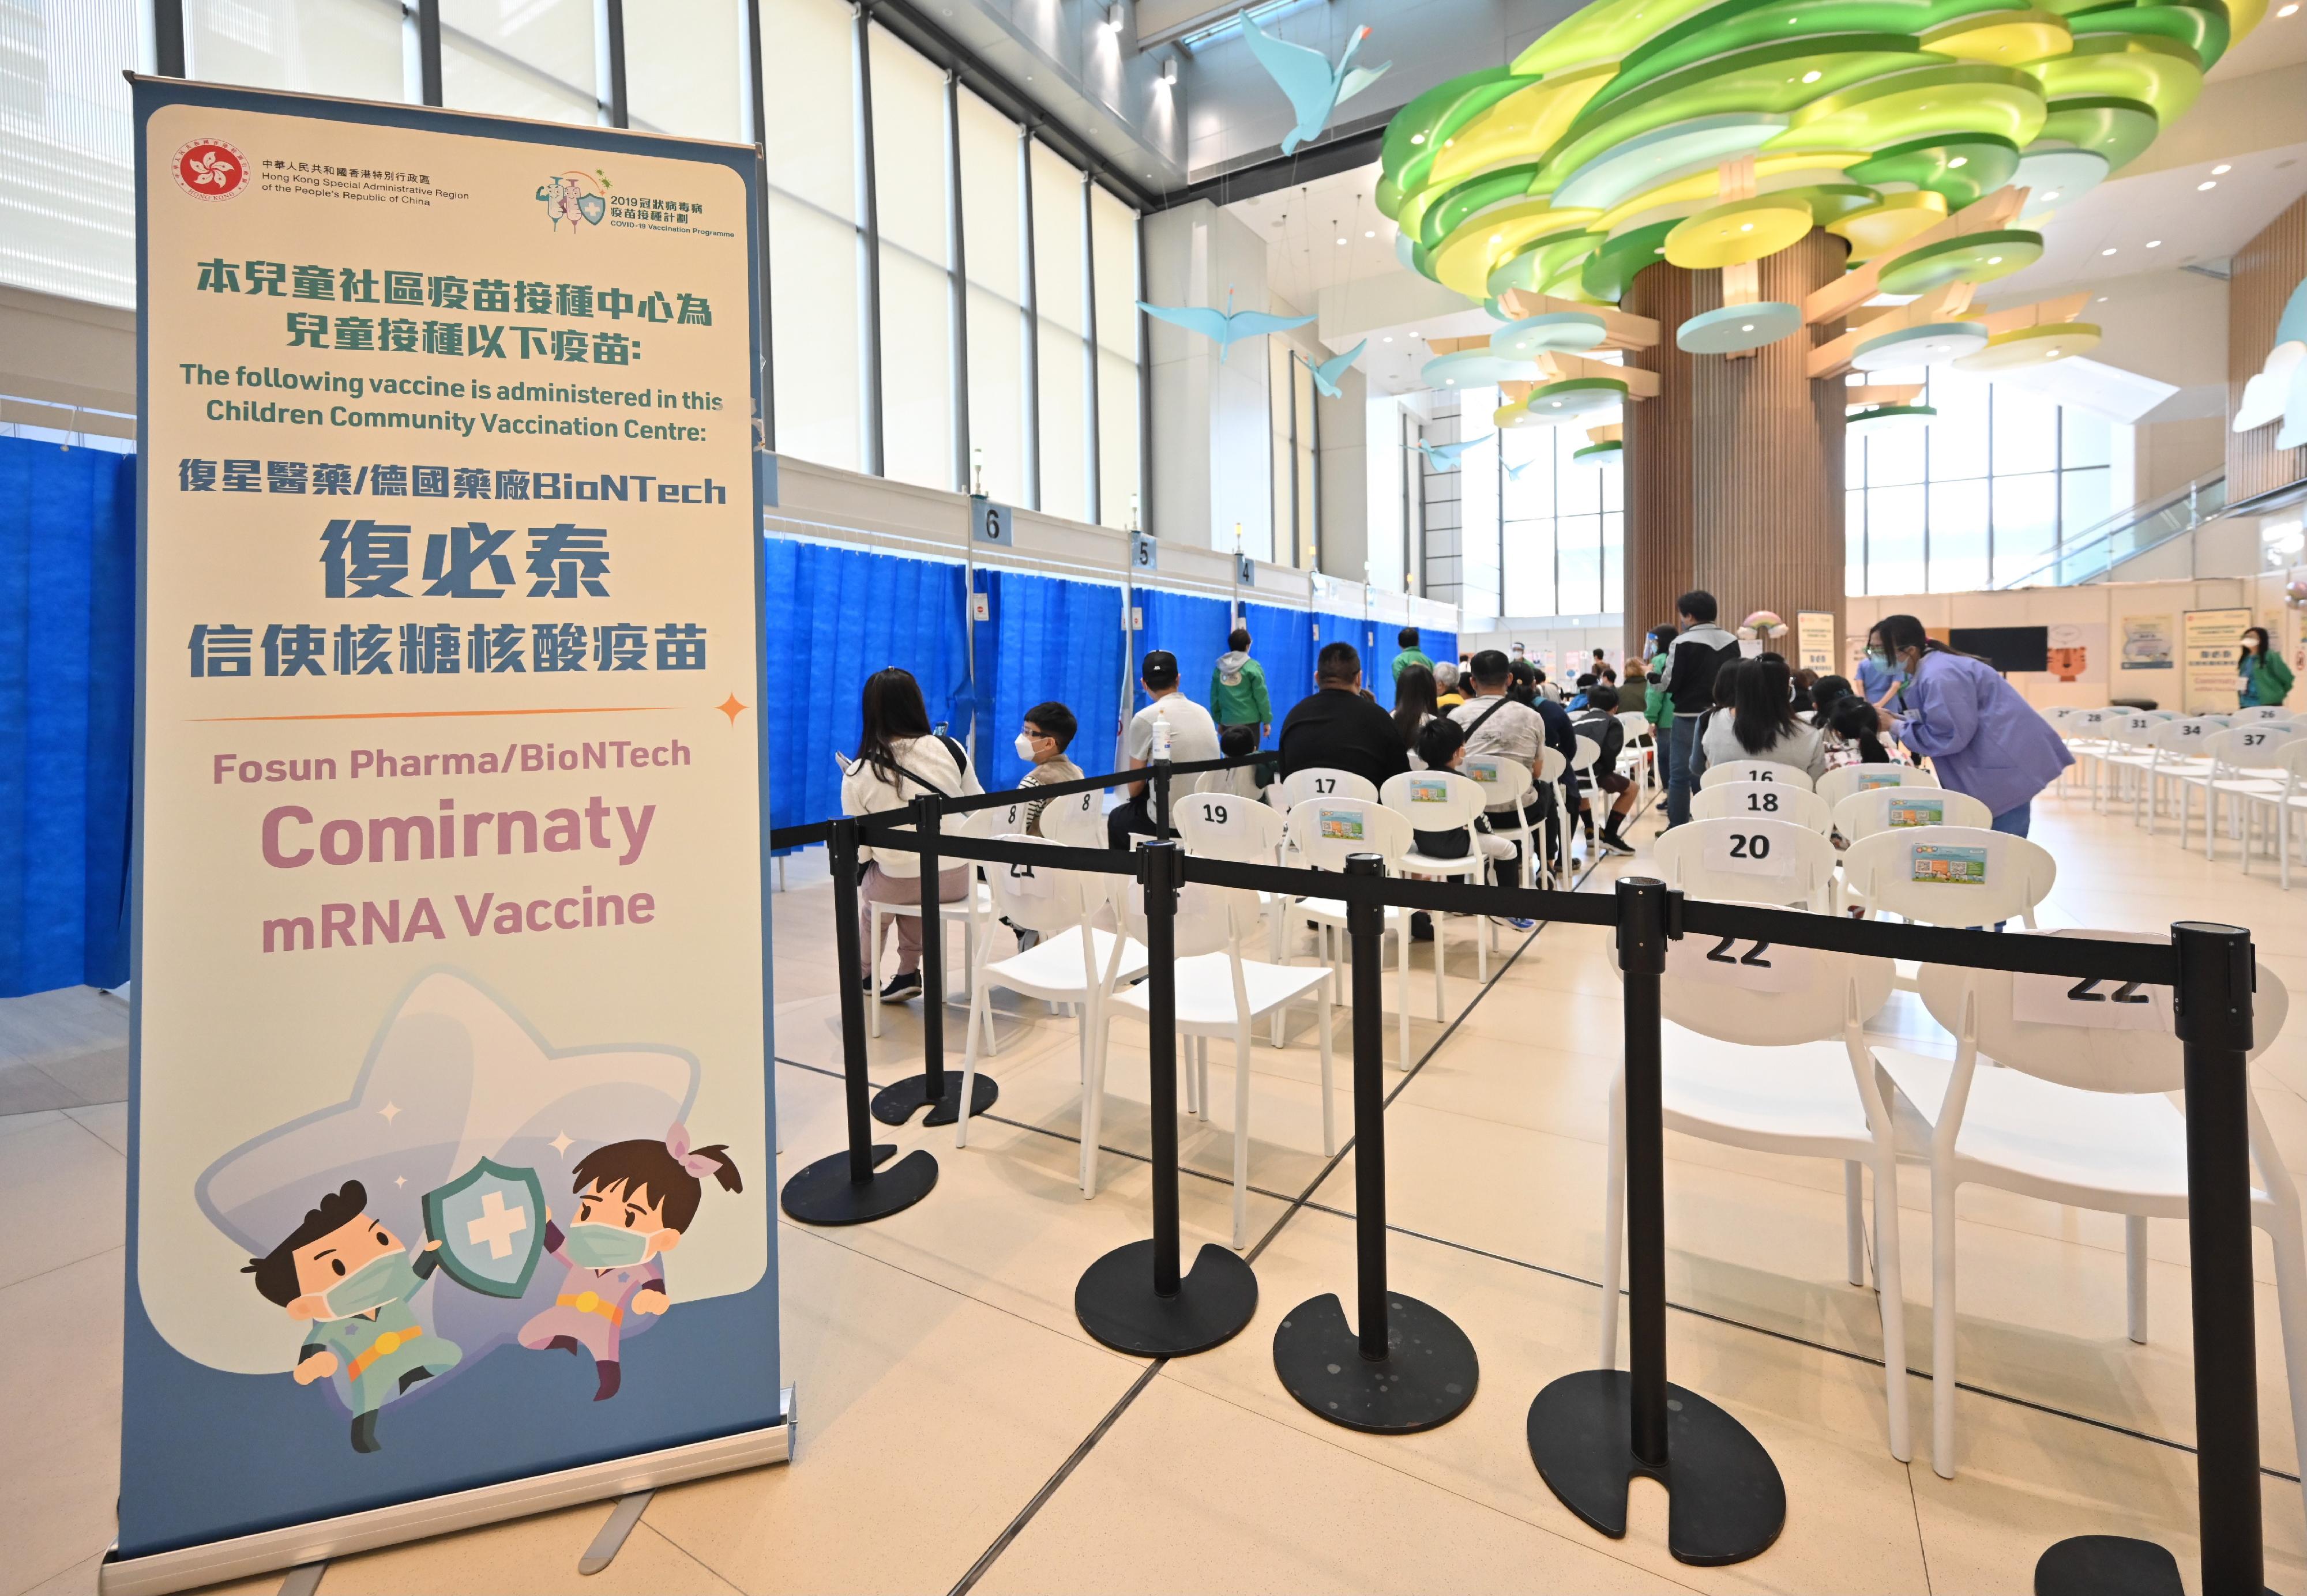 The Hong Kong Children's Hospital Children Community Vaccination Centre (CCVC) in Kowloon Bay is dedicated to providing the BioNTech vaccination service to children aged 5 to 11. Photo shows the waiting area for vaccination of the CCVC.